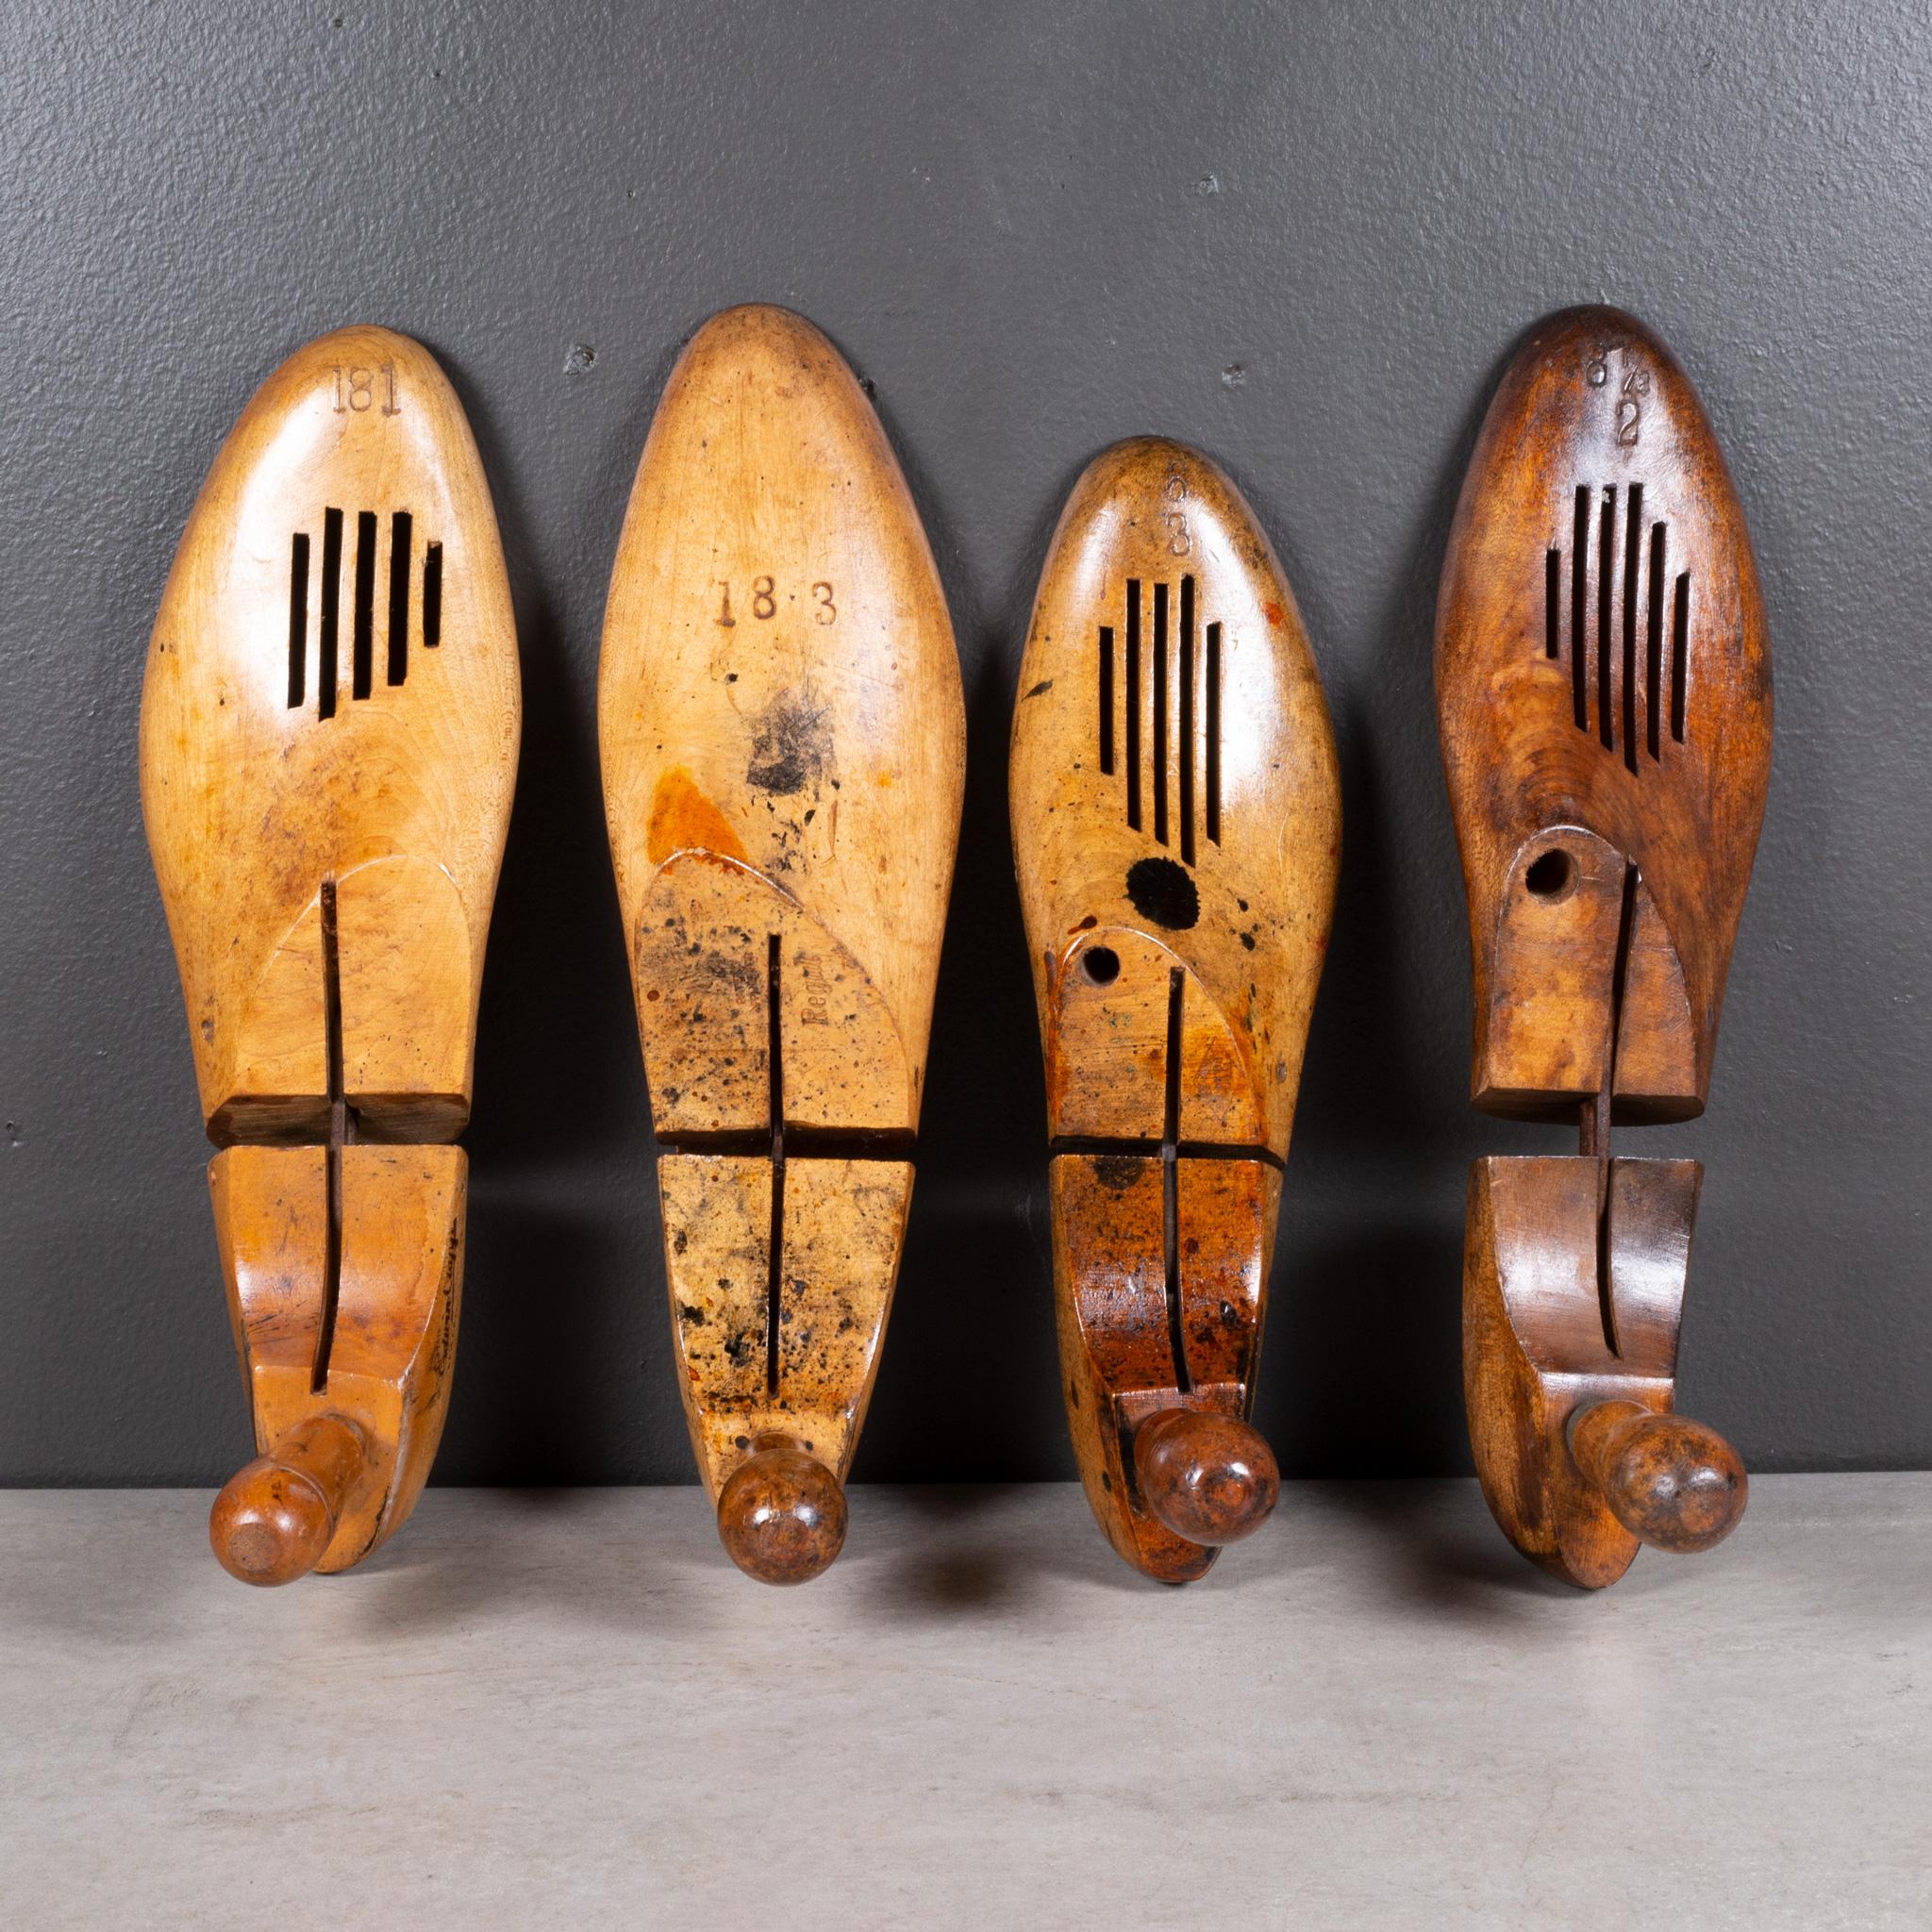 Maple Antique Wooden Shoe Forms c.1920-Multiple Sets Available (FREE SHIPPING) For Sale